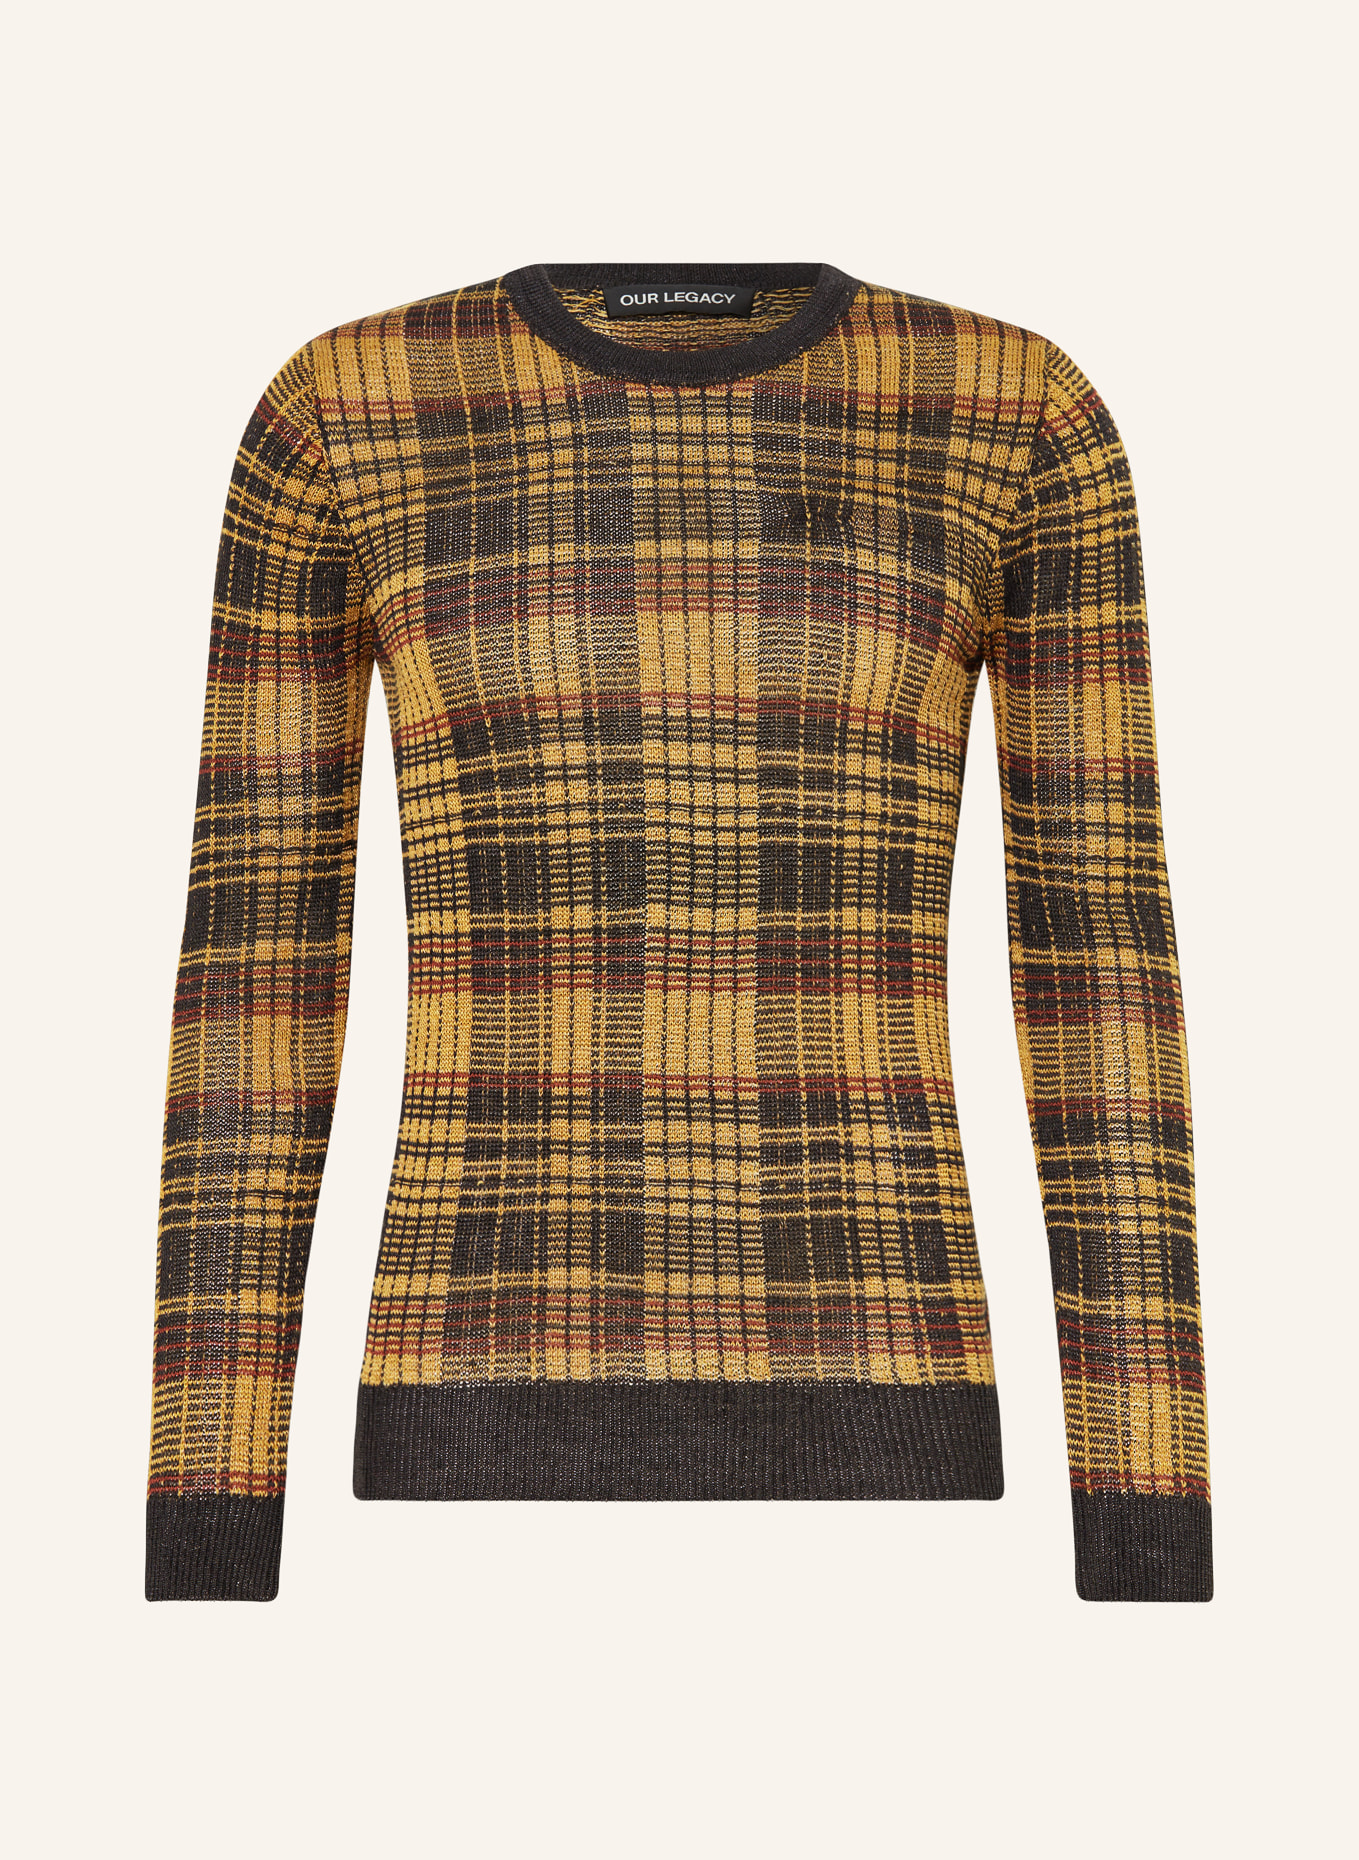 OUR LEGACY Sweater, Color: BLACK/ BROWN/ DARK YELLOW (Image 1)